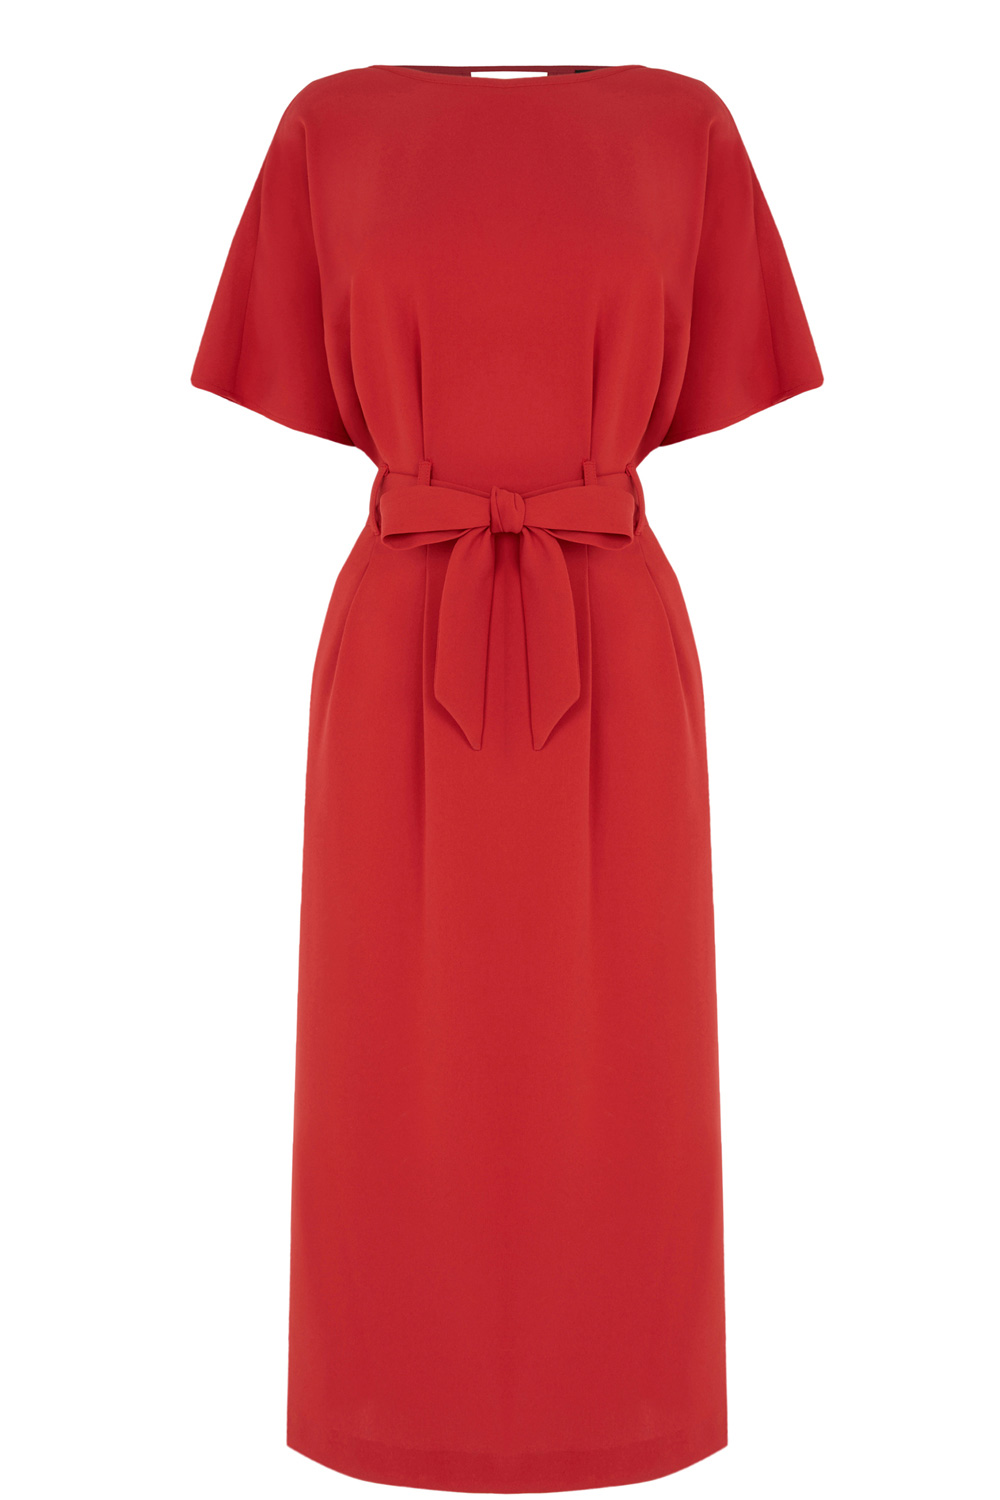 The Hunt for the Perfect Red Dress - Rachel the Hat